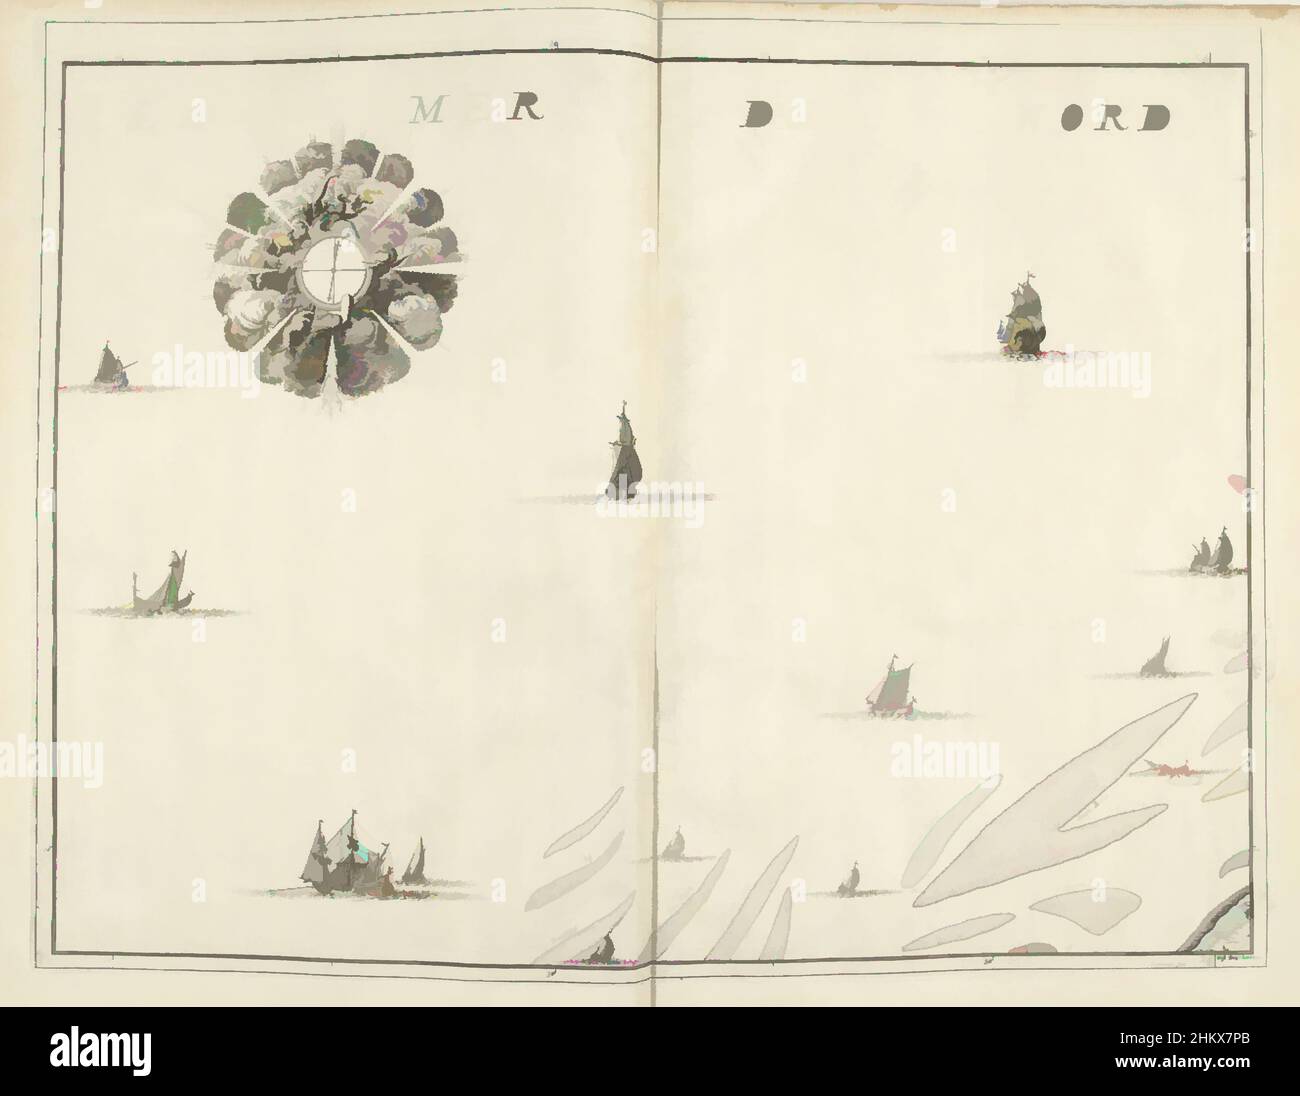 Art inspired by Map of the North Sea, ca. 1706-1712, La Mer du Nord, Map of the North Sea, top left a large compass rose, bottom right Dunkirk, ca. 1706-1712. Part of a bundled collection of plans of battles and cities renowned in the War of the Spanish Succession. This plate is among, Classic works modernized by Artotop with a splash of modernity. Shapes, color and value, eye-catching visual impact on art. Emotions through freedom of artworks in a contemporary way. A timeless message pursuing a wildly creative new direction. Artists turning to the digital medium and creating the Artotop NFT Stock Photo